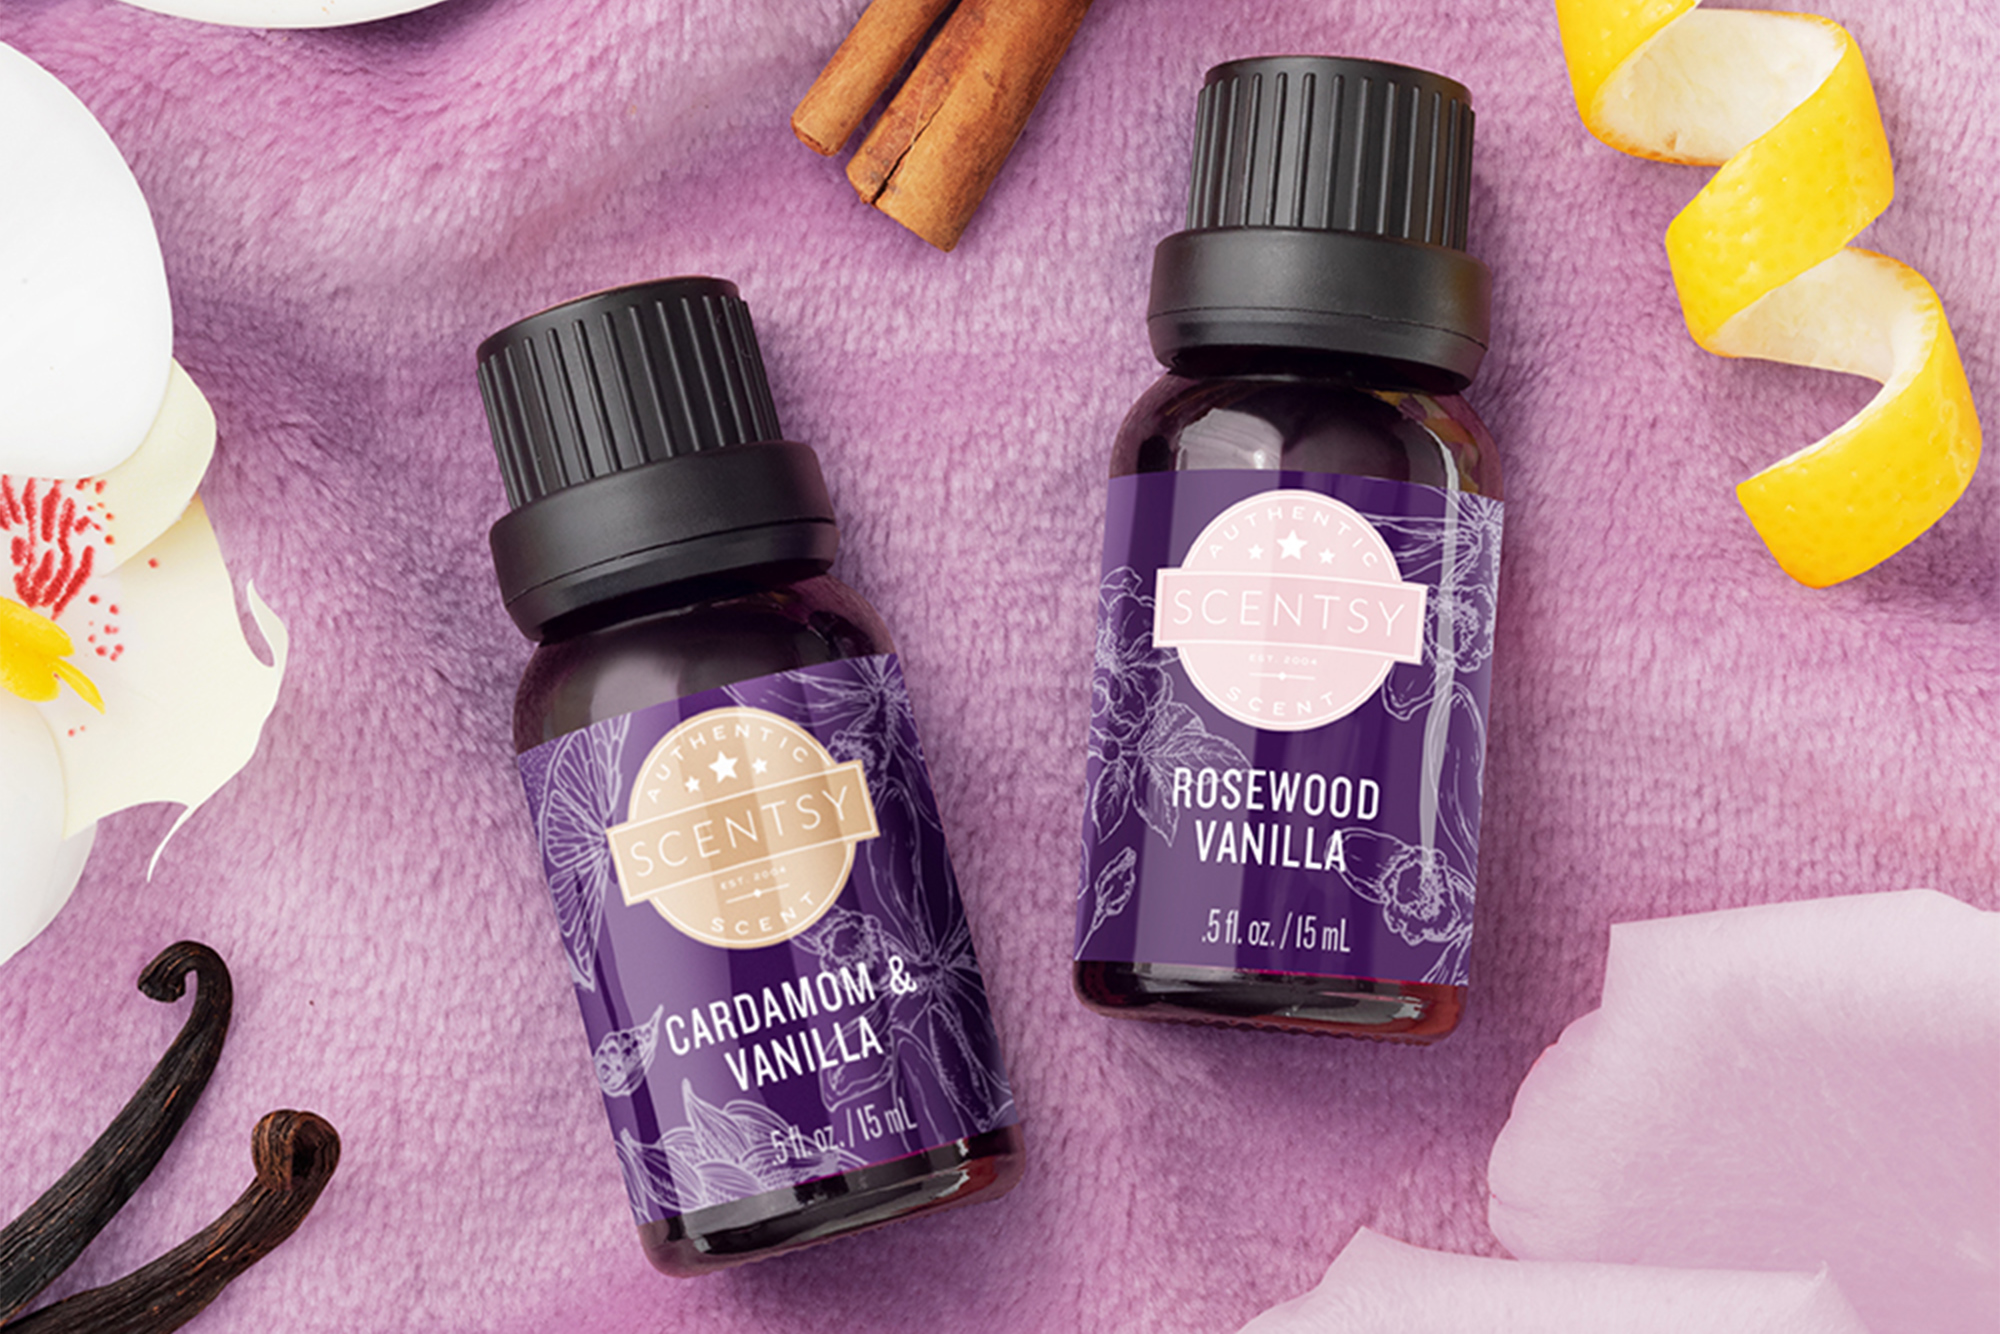 Scentsy's Cardamom & Vanilla oil and the Rosewood Vanilla oil with their ingredients